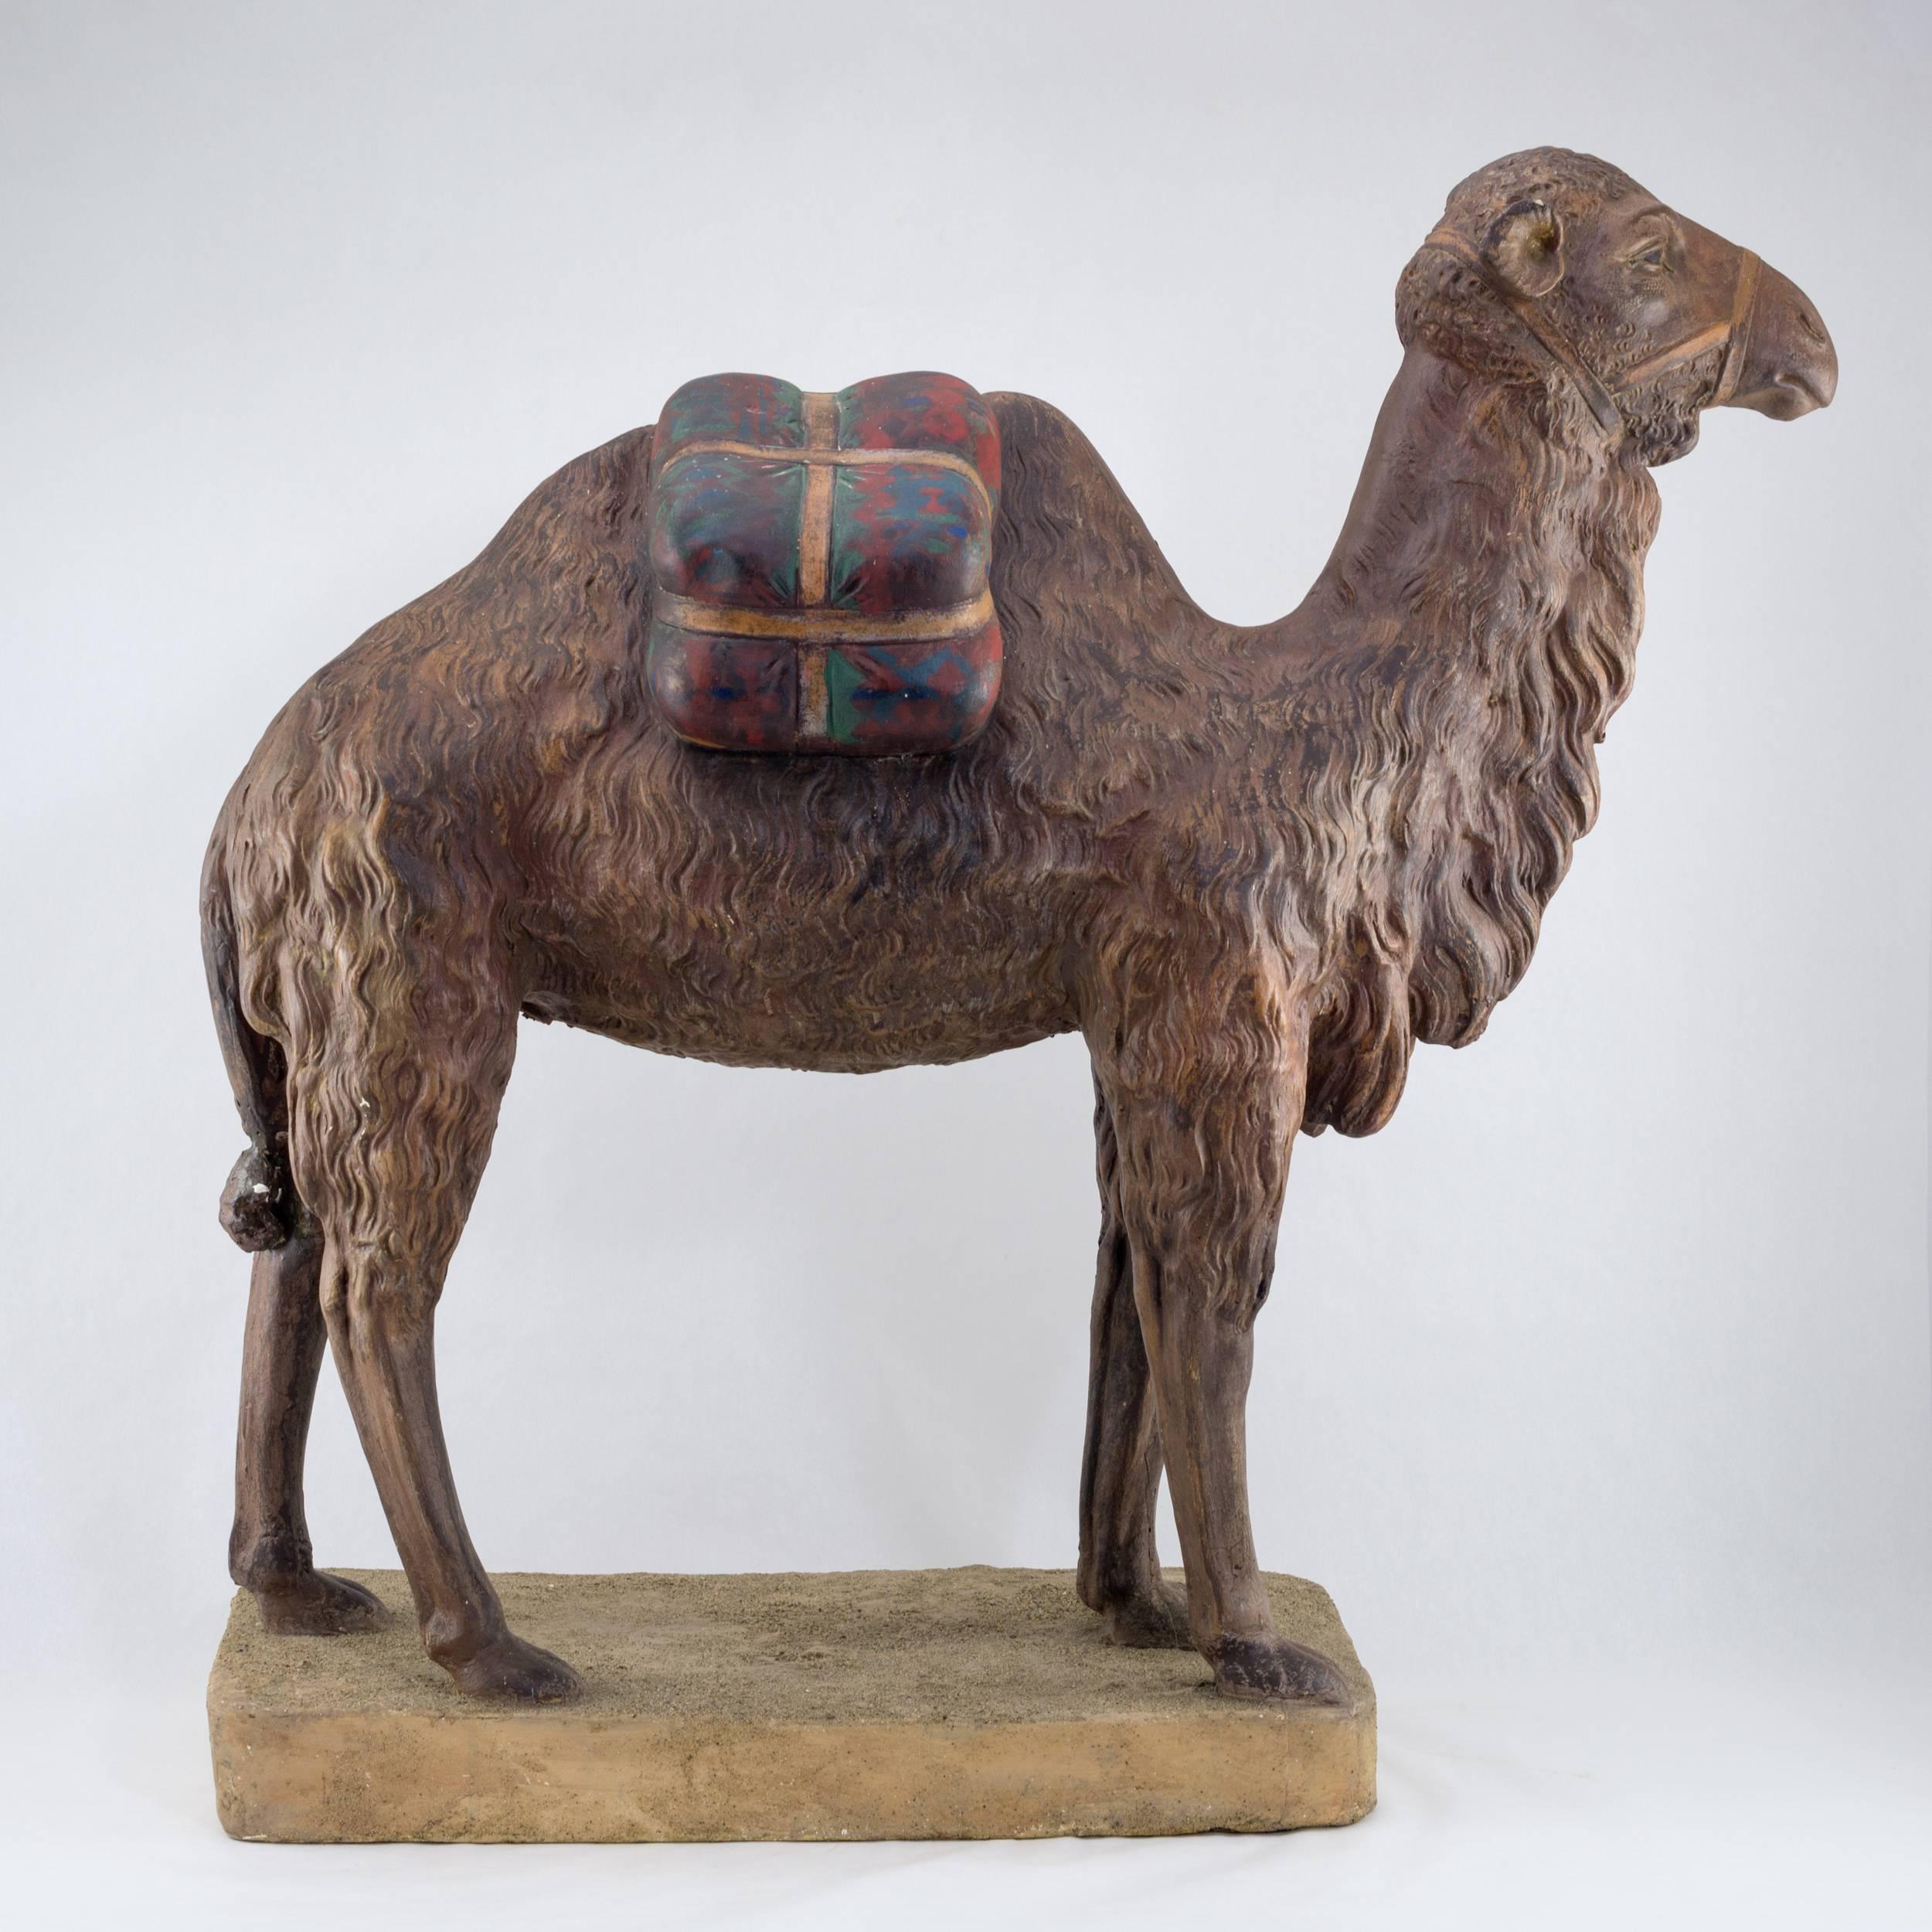 Terracotta polychromed figure of a camel
Finely detailed, standing on sand style
terracotta plinth.
American, circa 1940
$2500.
  